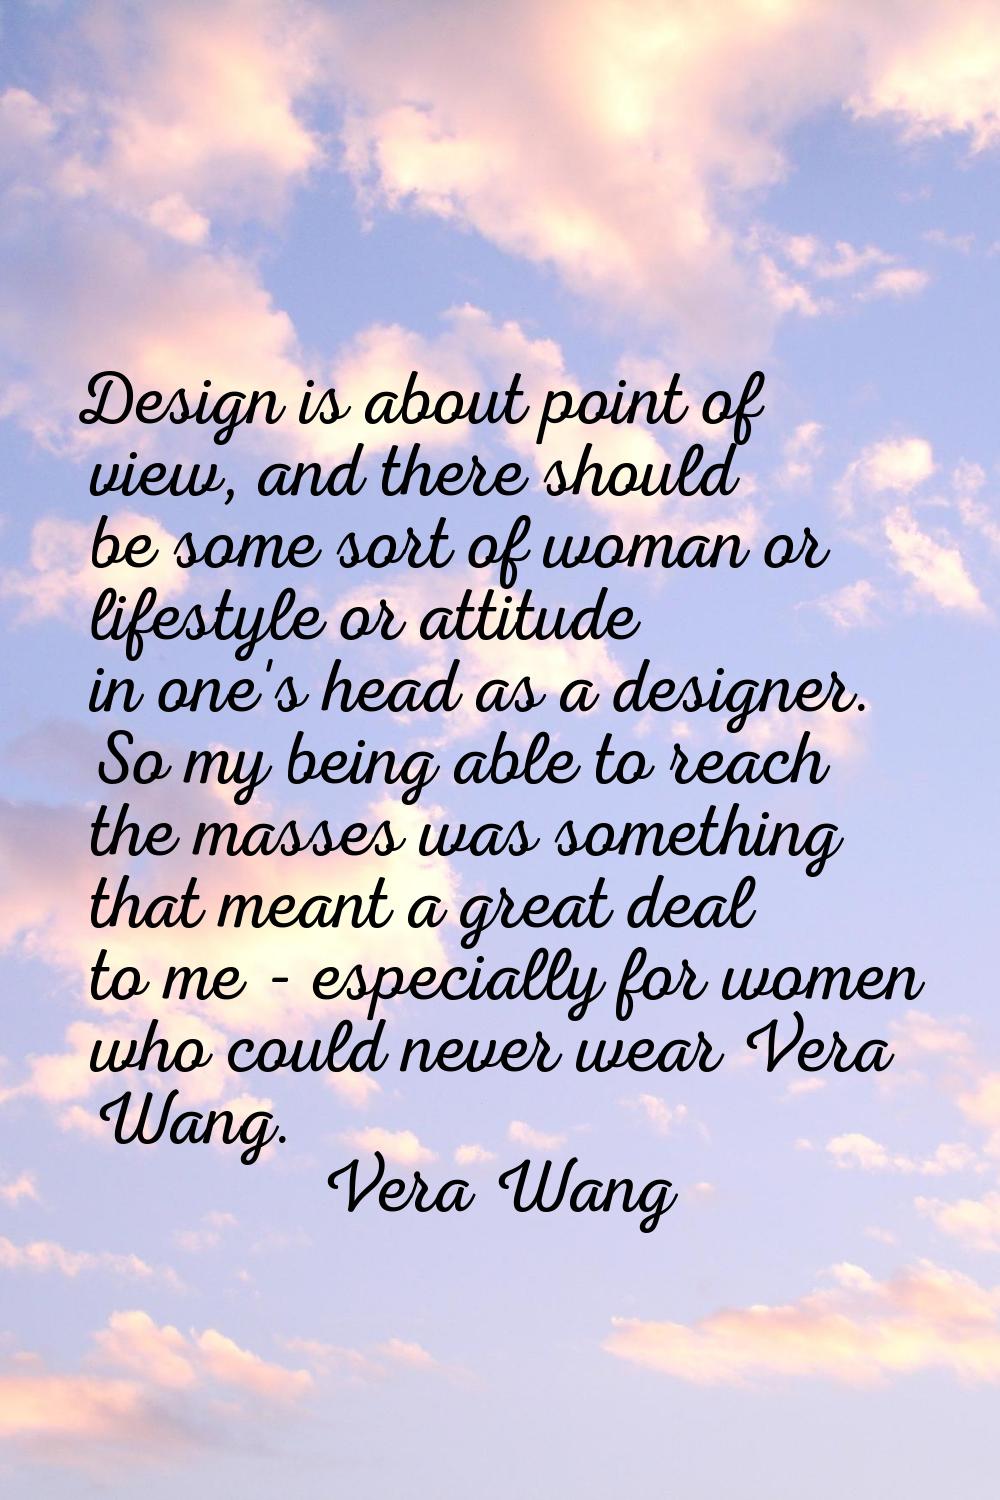 Design is about point of view, and there should be some sort of woman or lifestyle or attitude in o